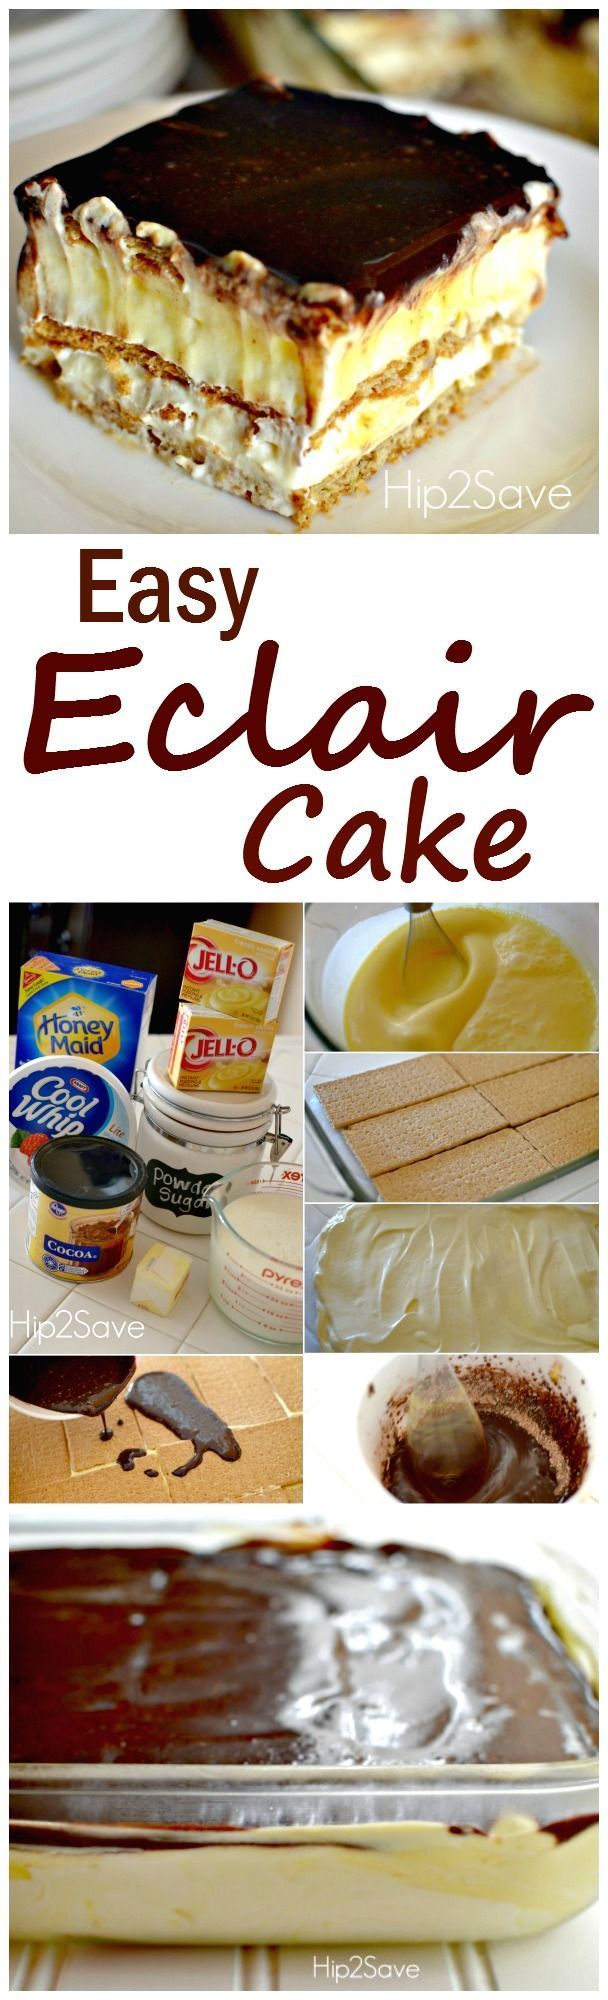 A wonderful and easy eclair dessert cake recipe. Enjoy this will your family after a wonderful meal, or make it to impress your